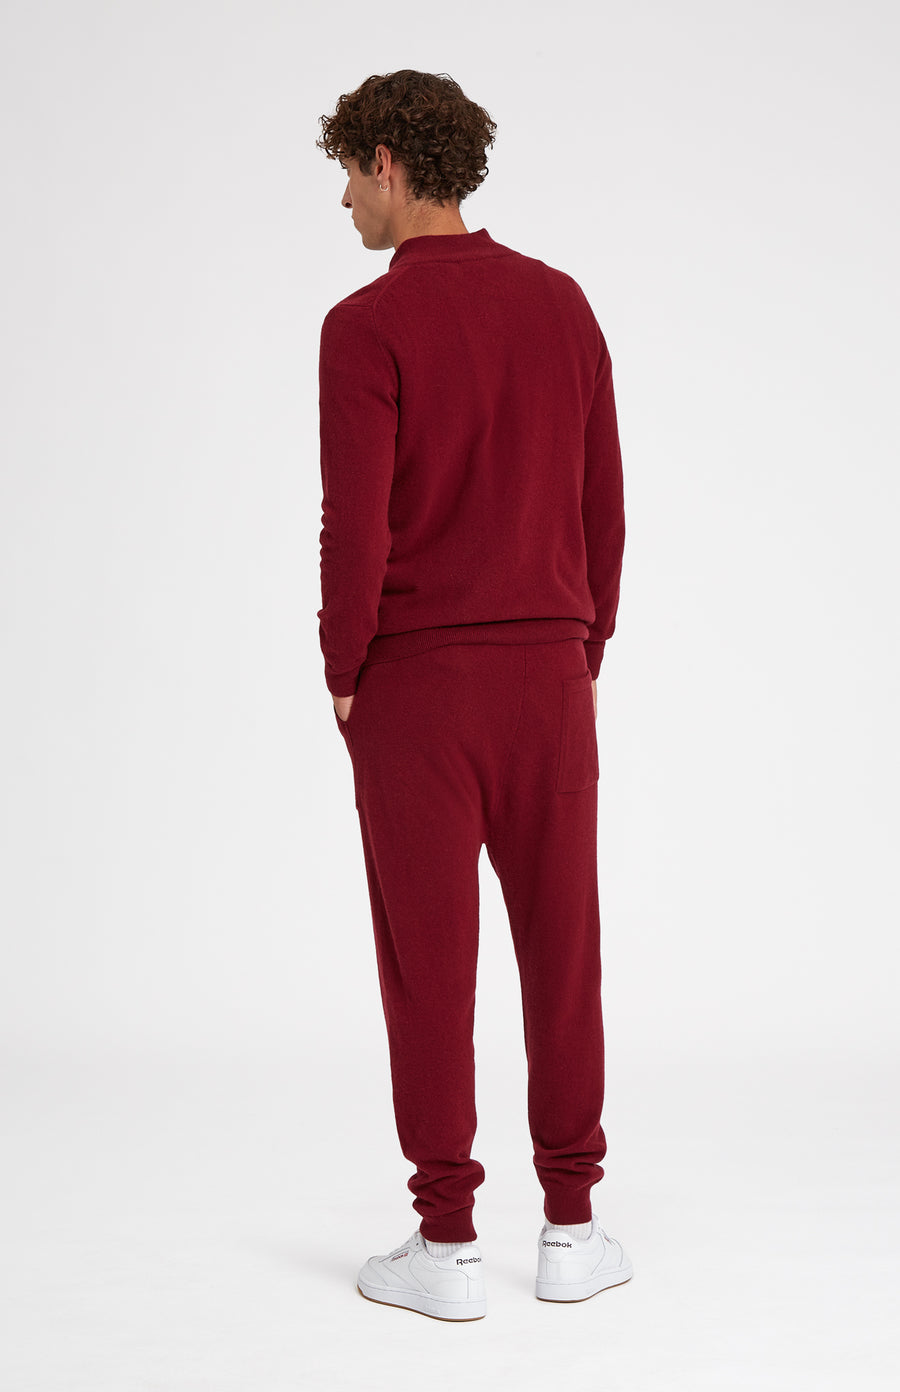 Men's Knitted Merino Cashmere Joggers in Burgundy rear view - Pringle of Scotland